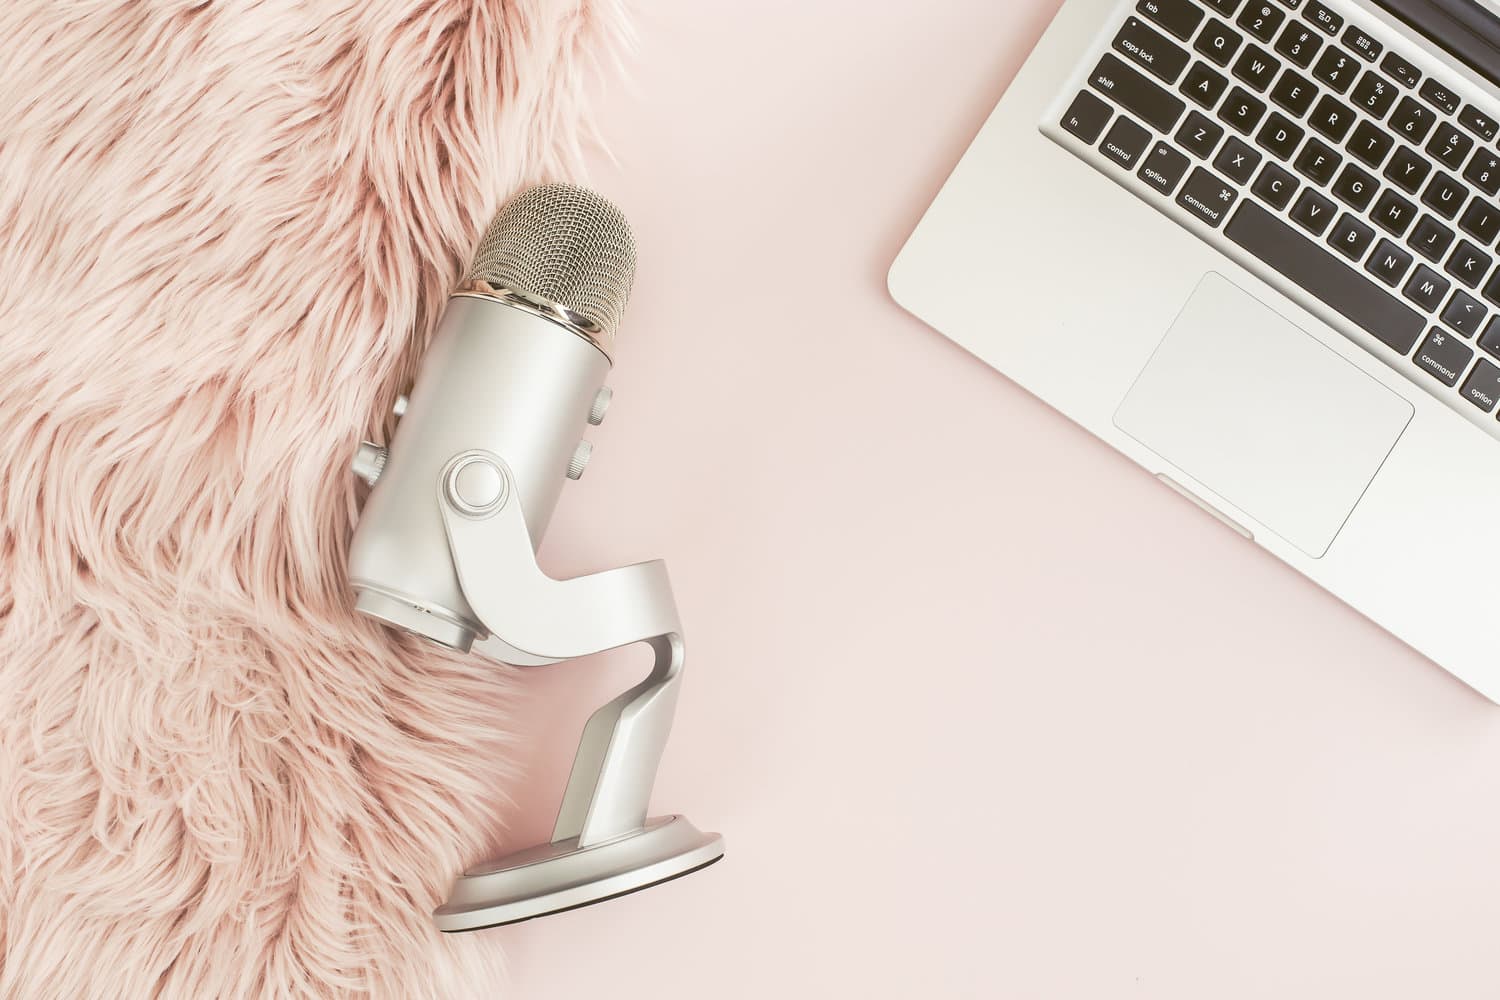 microphone-and-laptop-on-pink-background